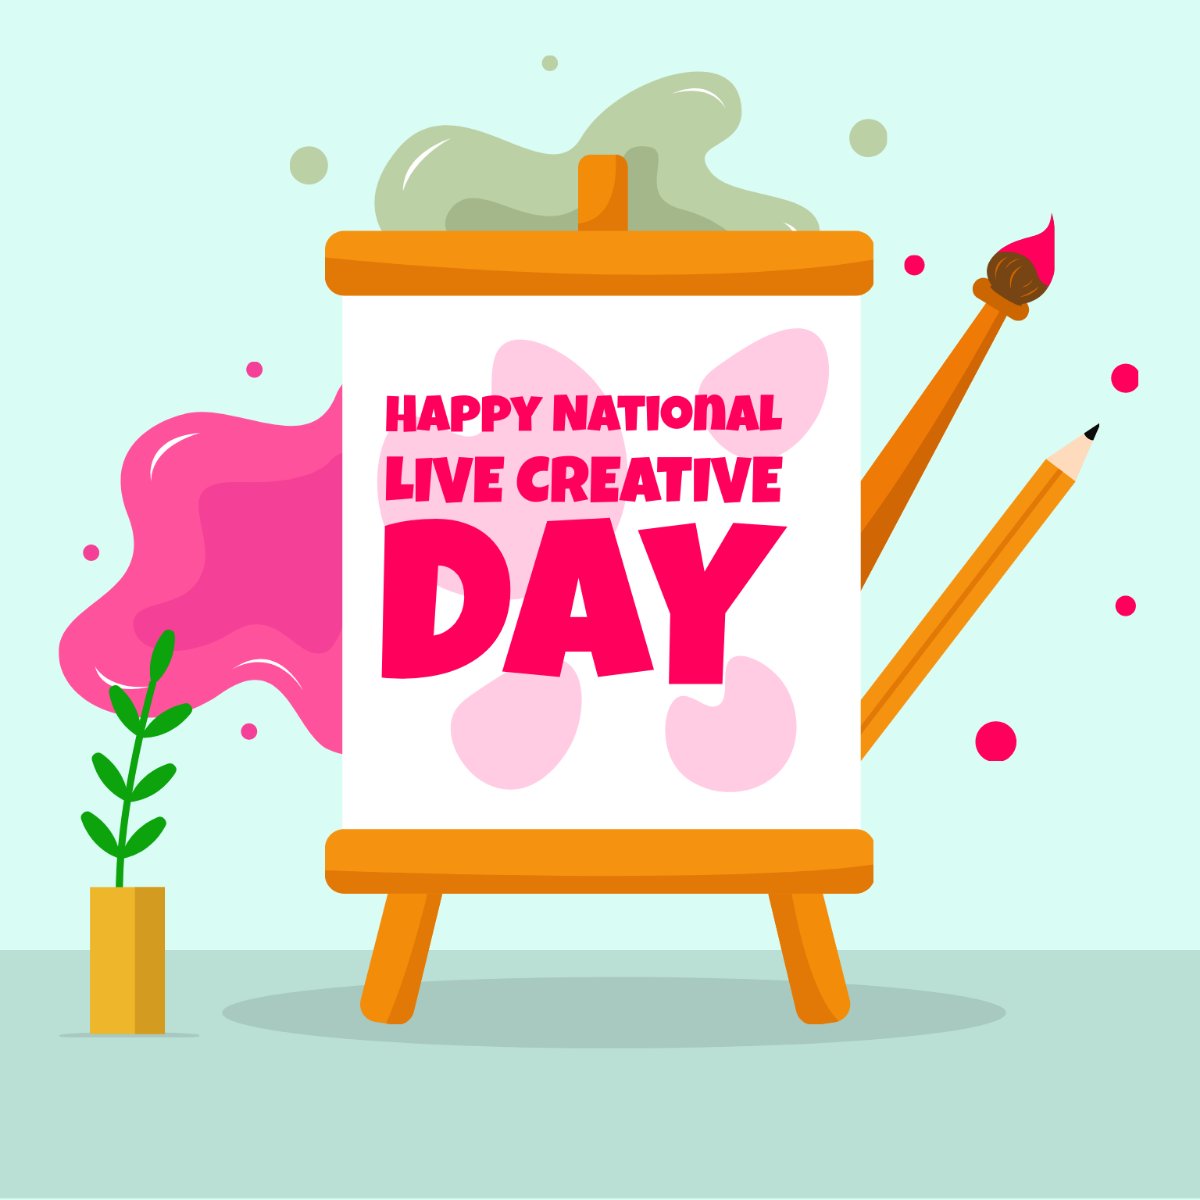 Happy National Live Creative Day Illustration Template